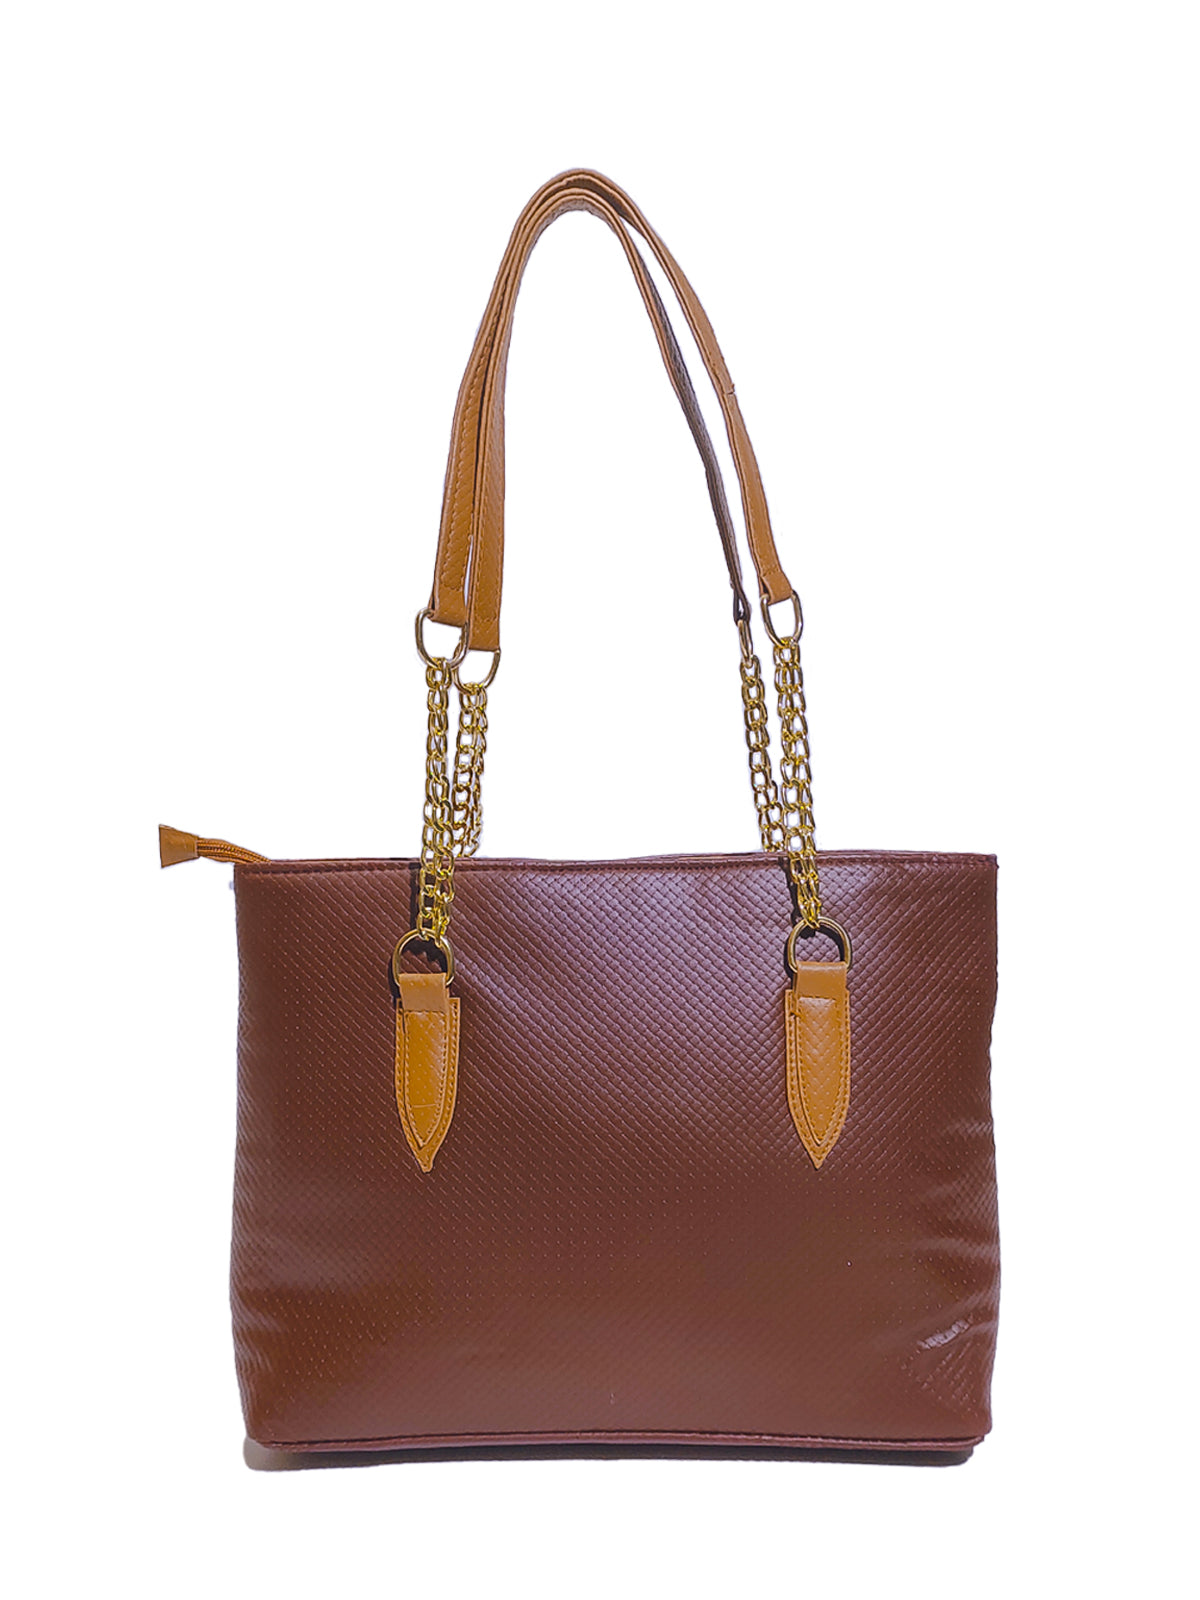 Duck Style Tote Bag | Genuine PU Leather Tote Bags in Pakistan